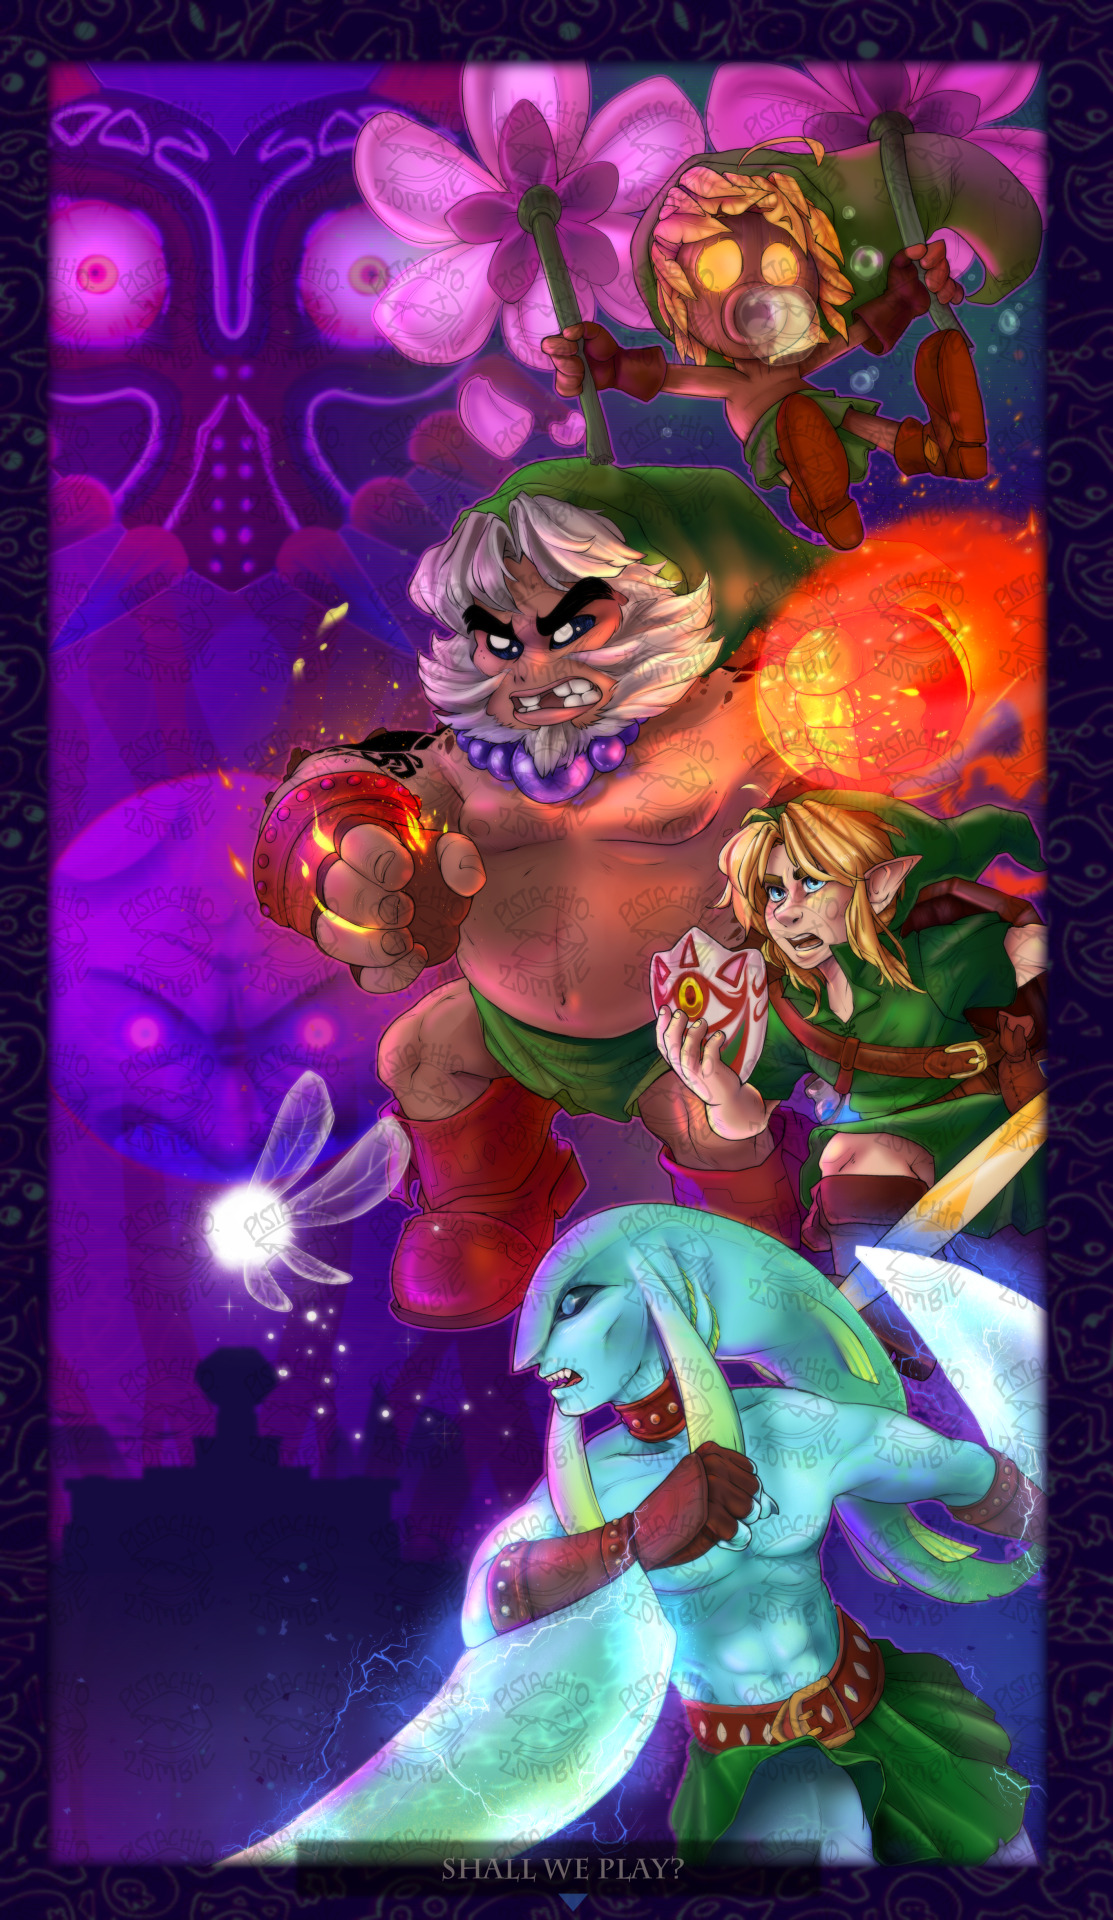 Finally Finished! Just in time for Zelda’s 35th Anniversary too!,  My big Majora’s Mask fan art that I’ve been wanting to 